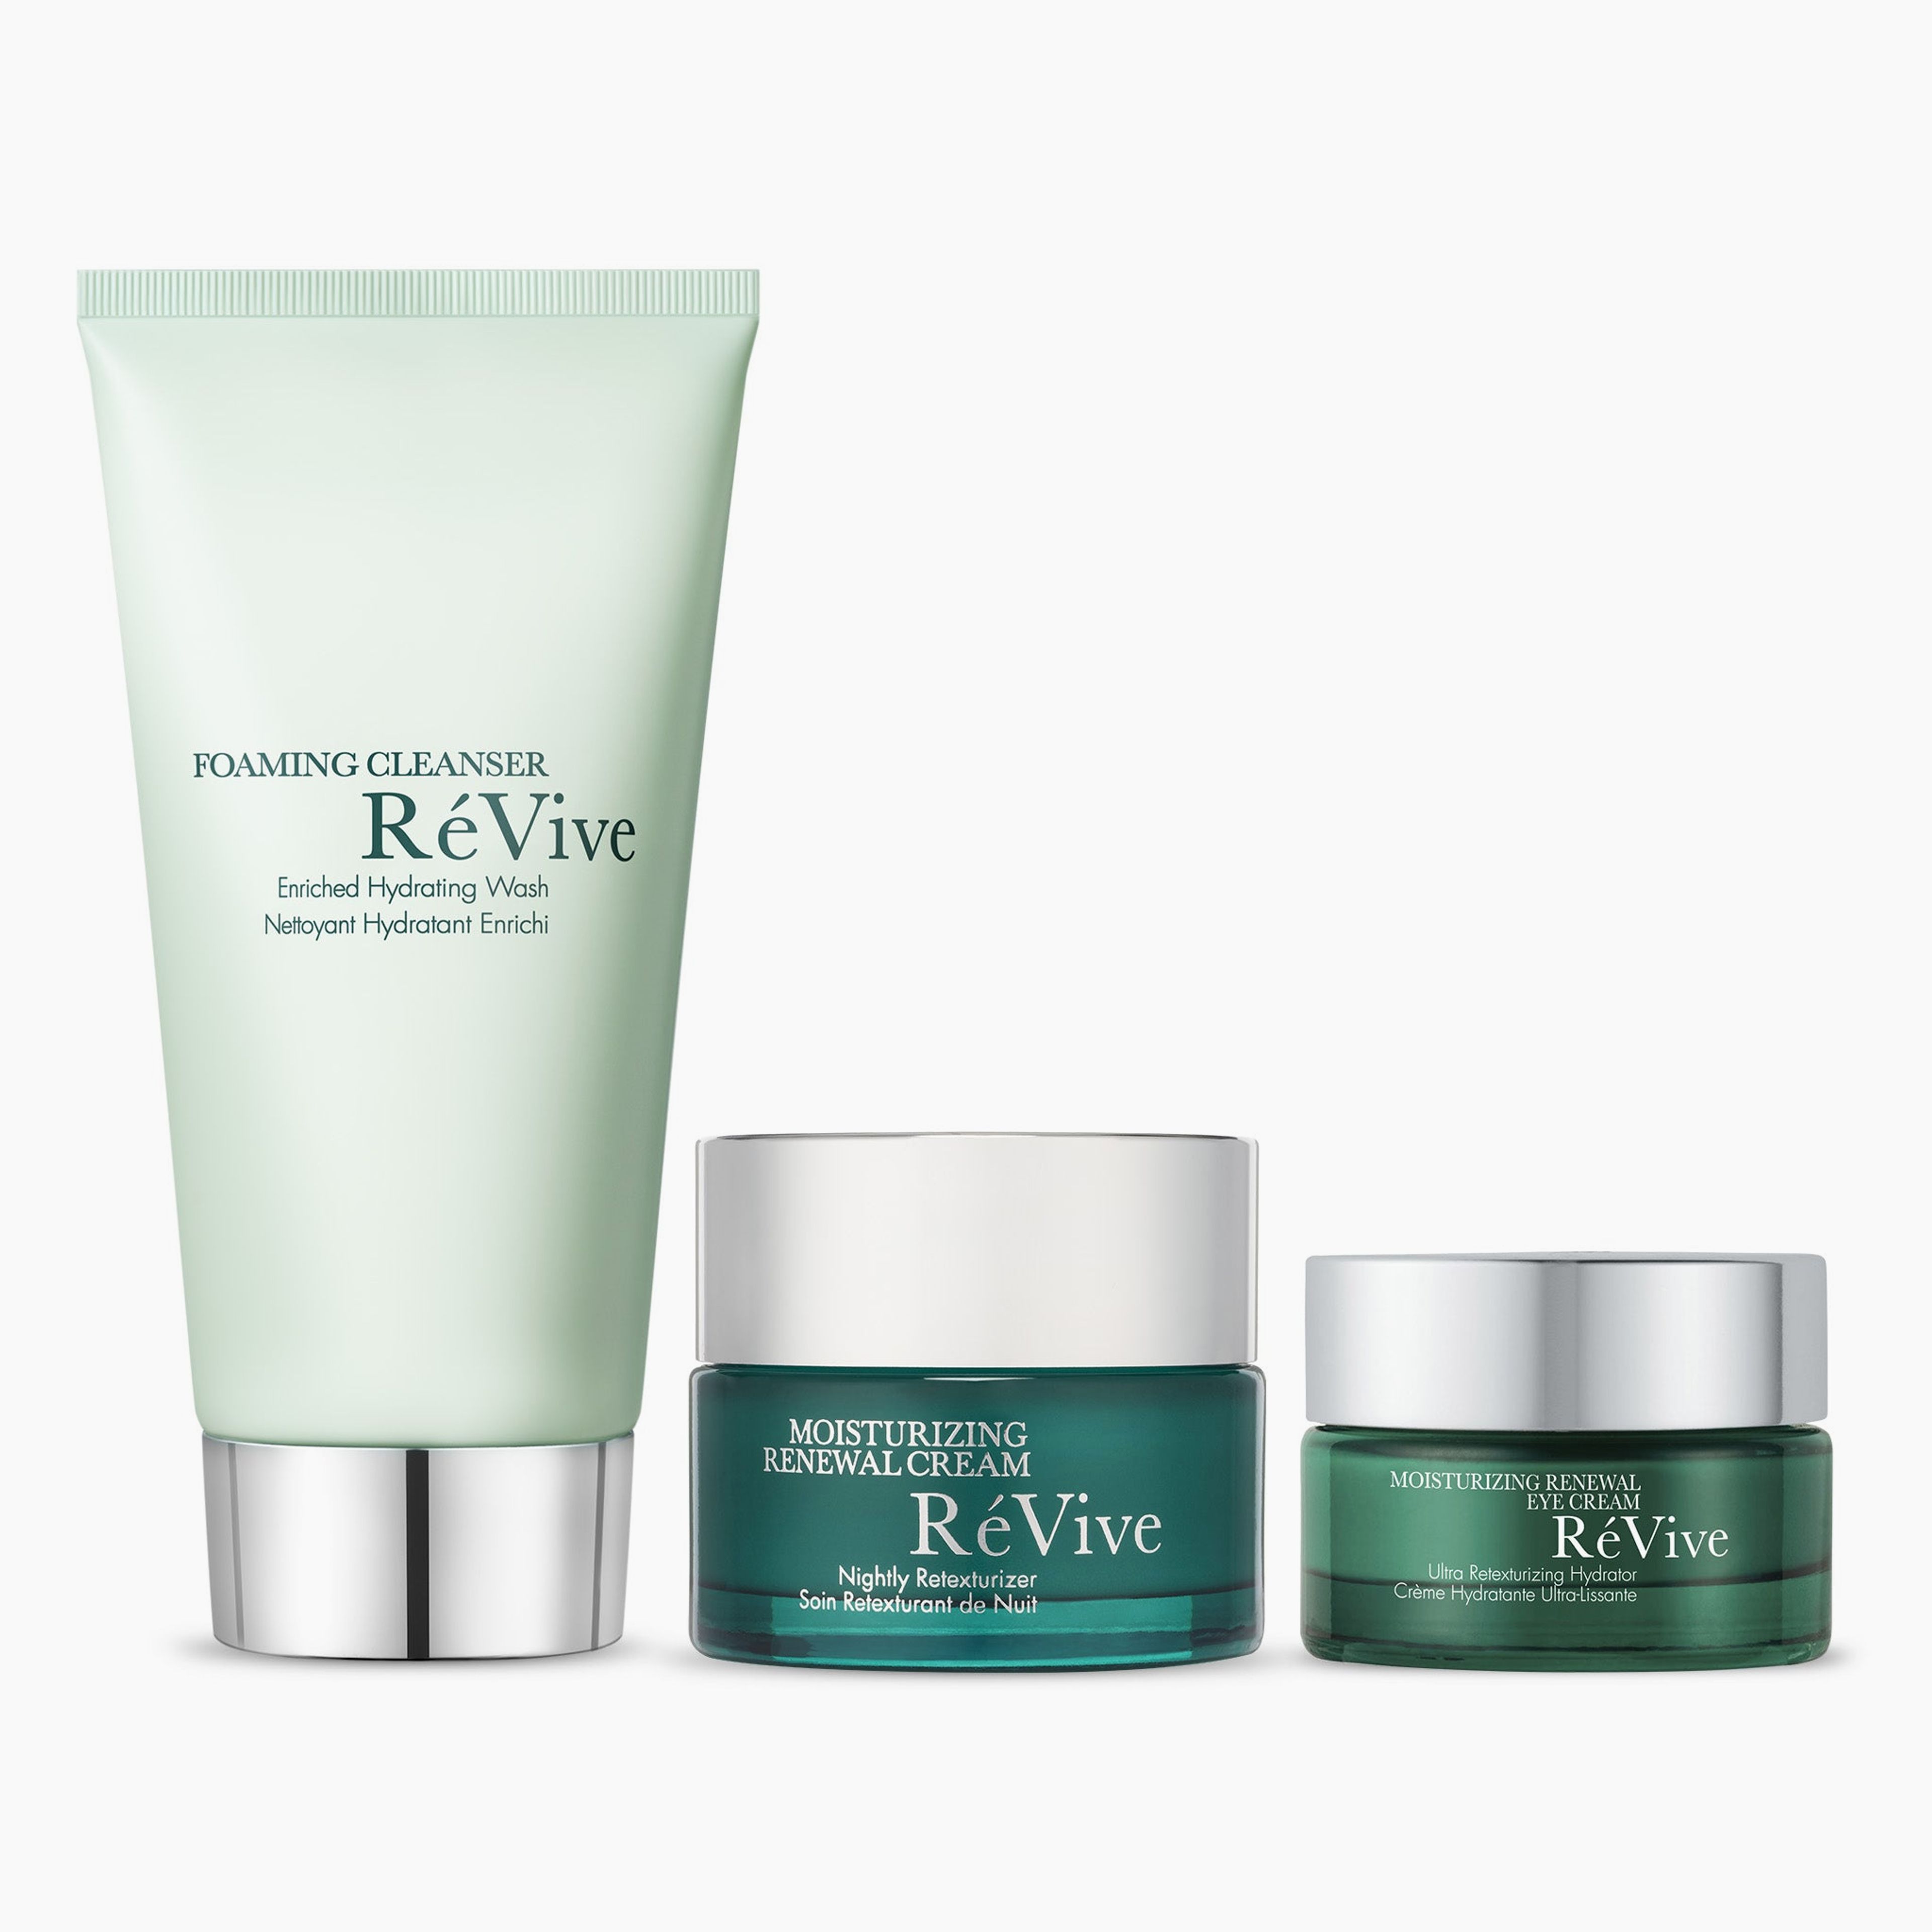 A New Face Overnight Set / Foaming Cleanser, Moisturizing Renewal Cream & Moisturizing Renewal Eye Cream